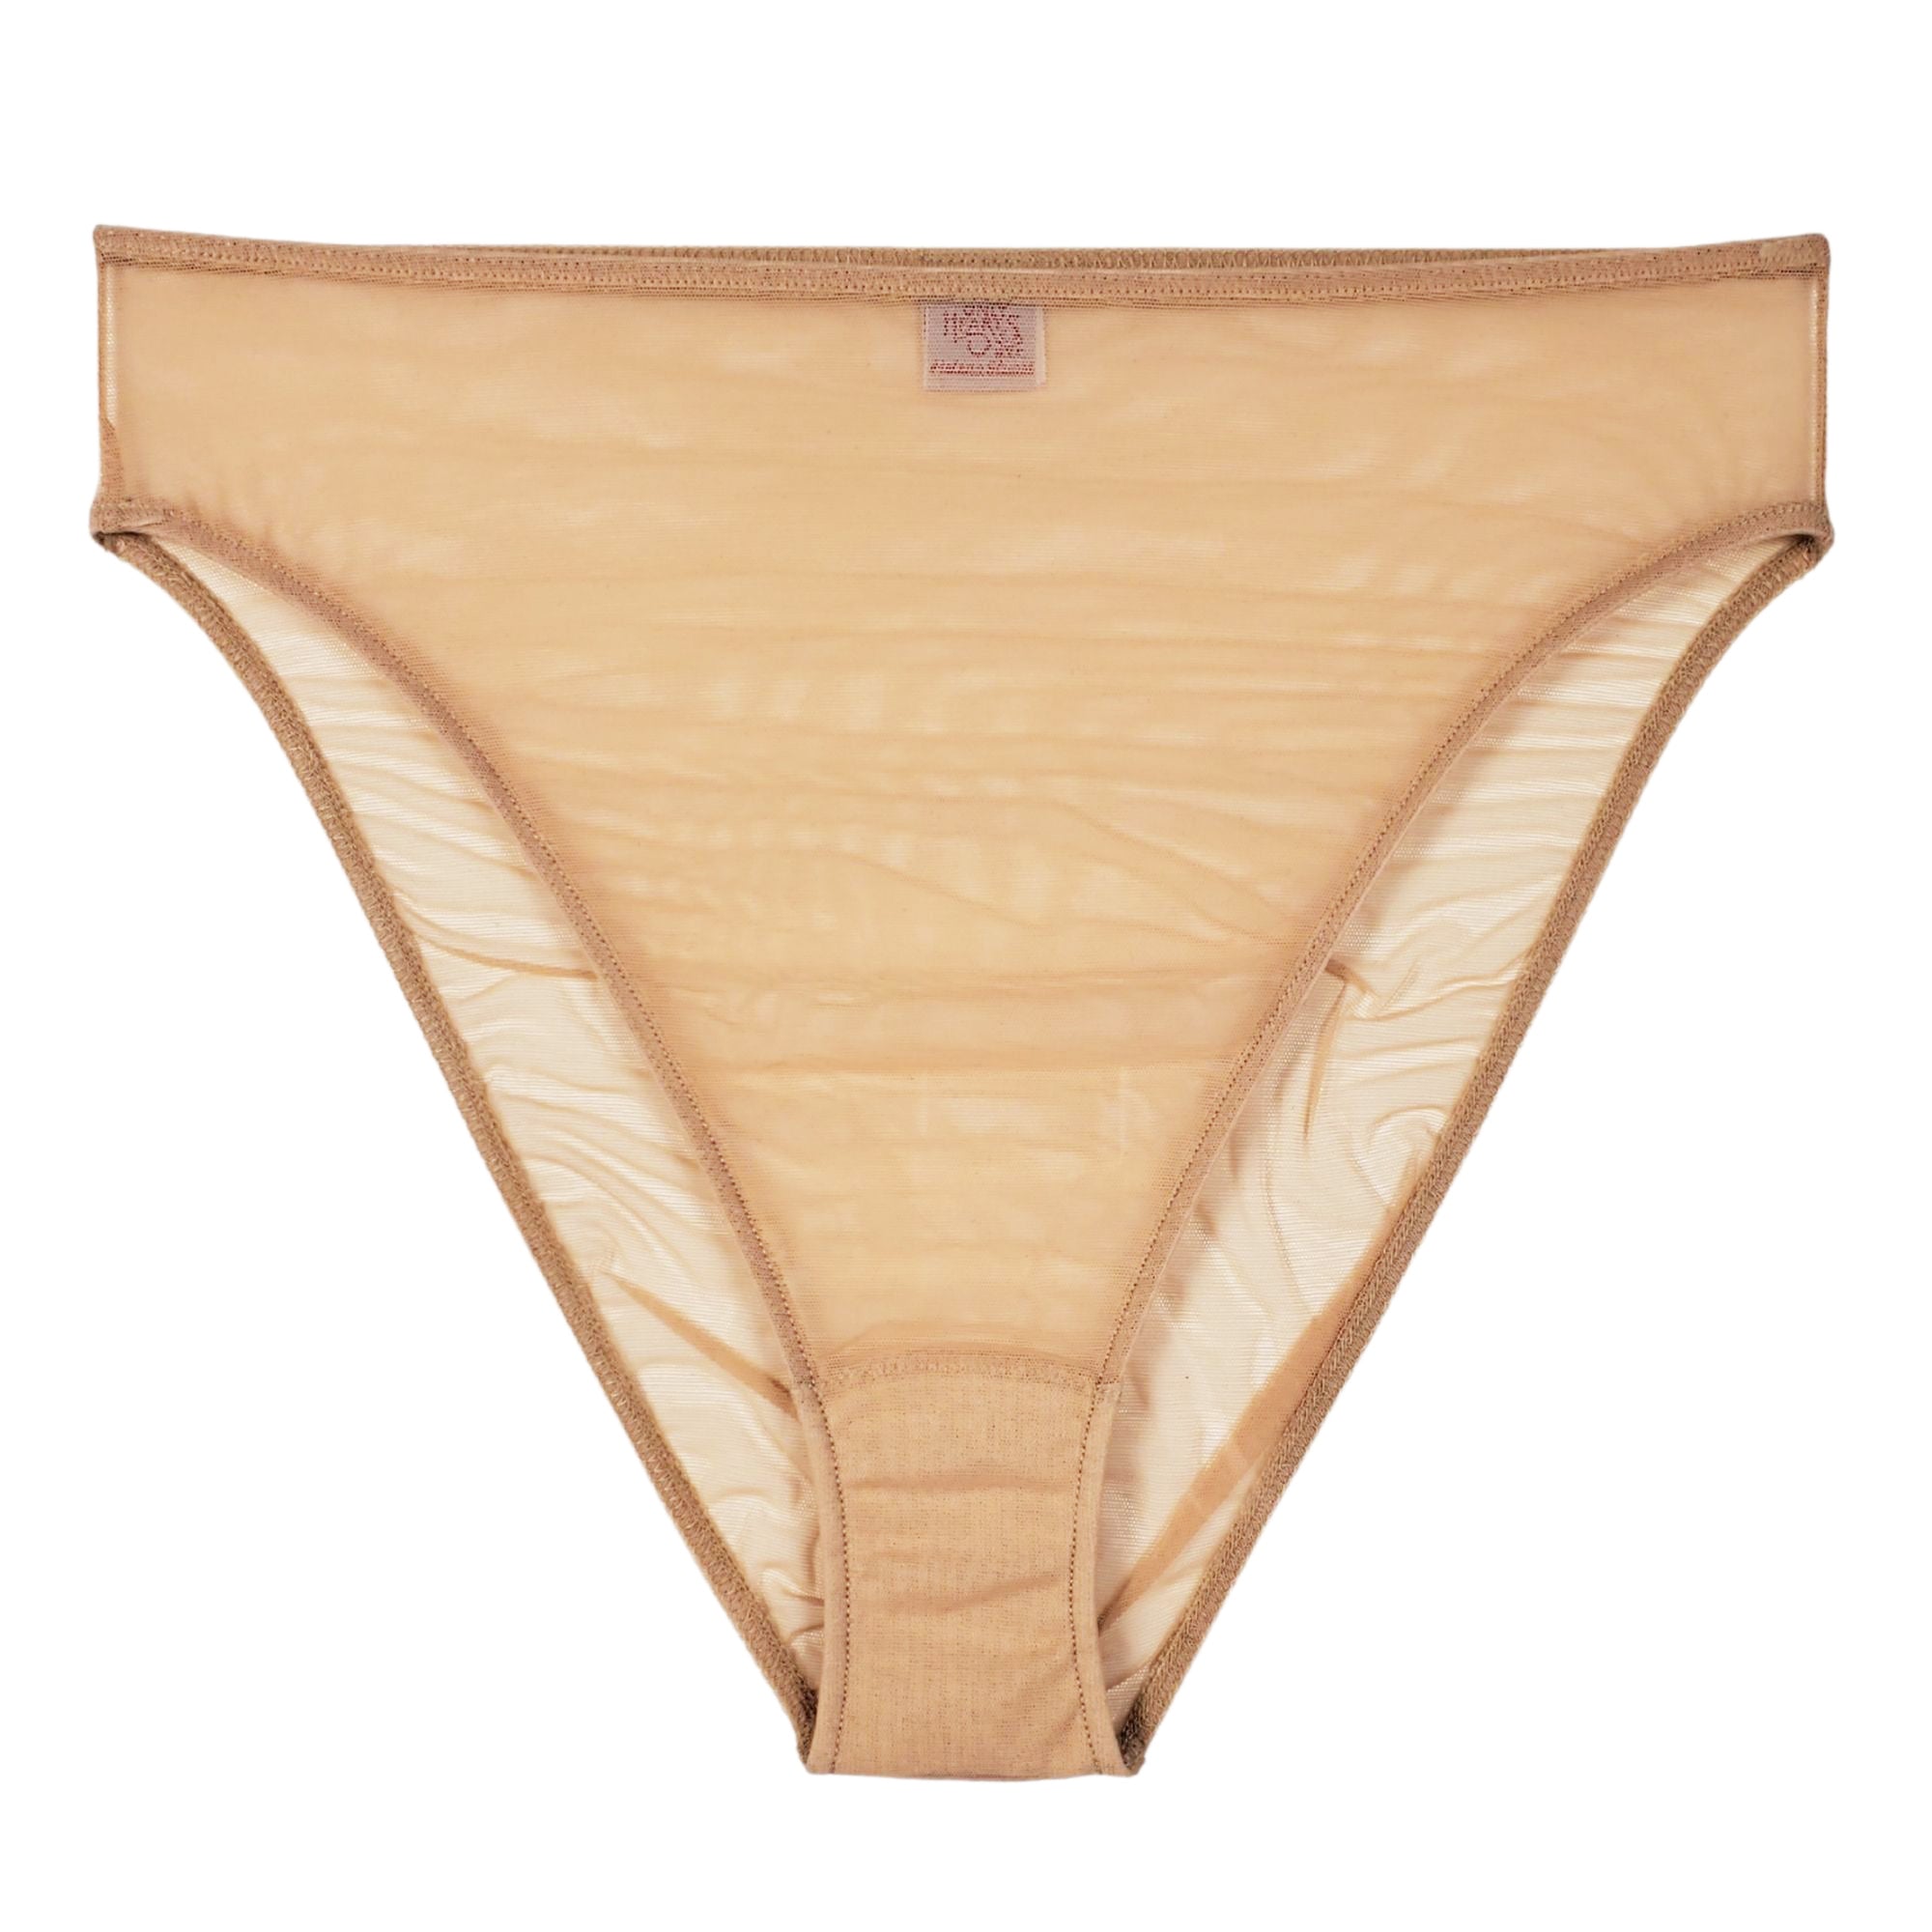 Only Hearts Whisper High Cut Brief